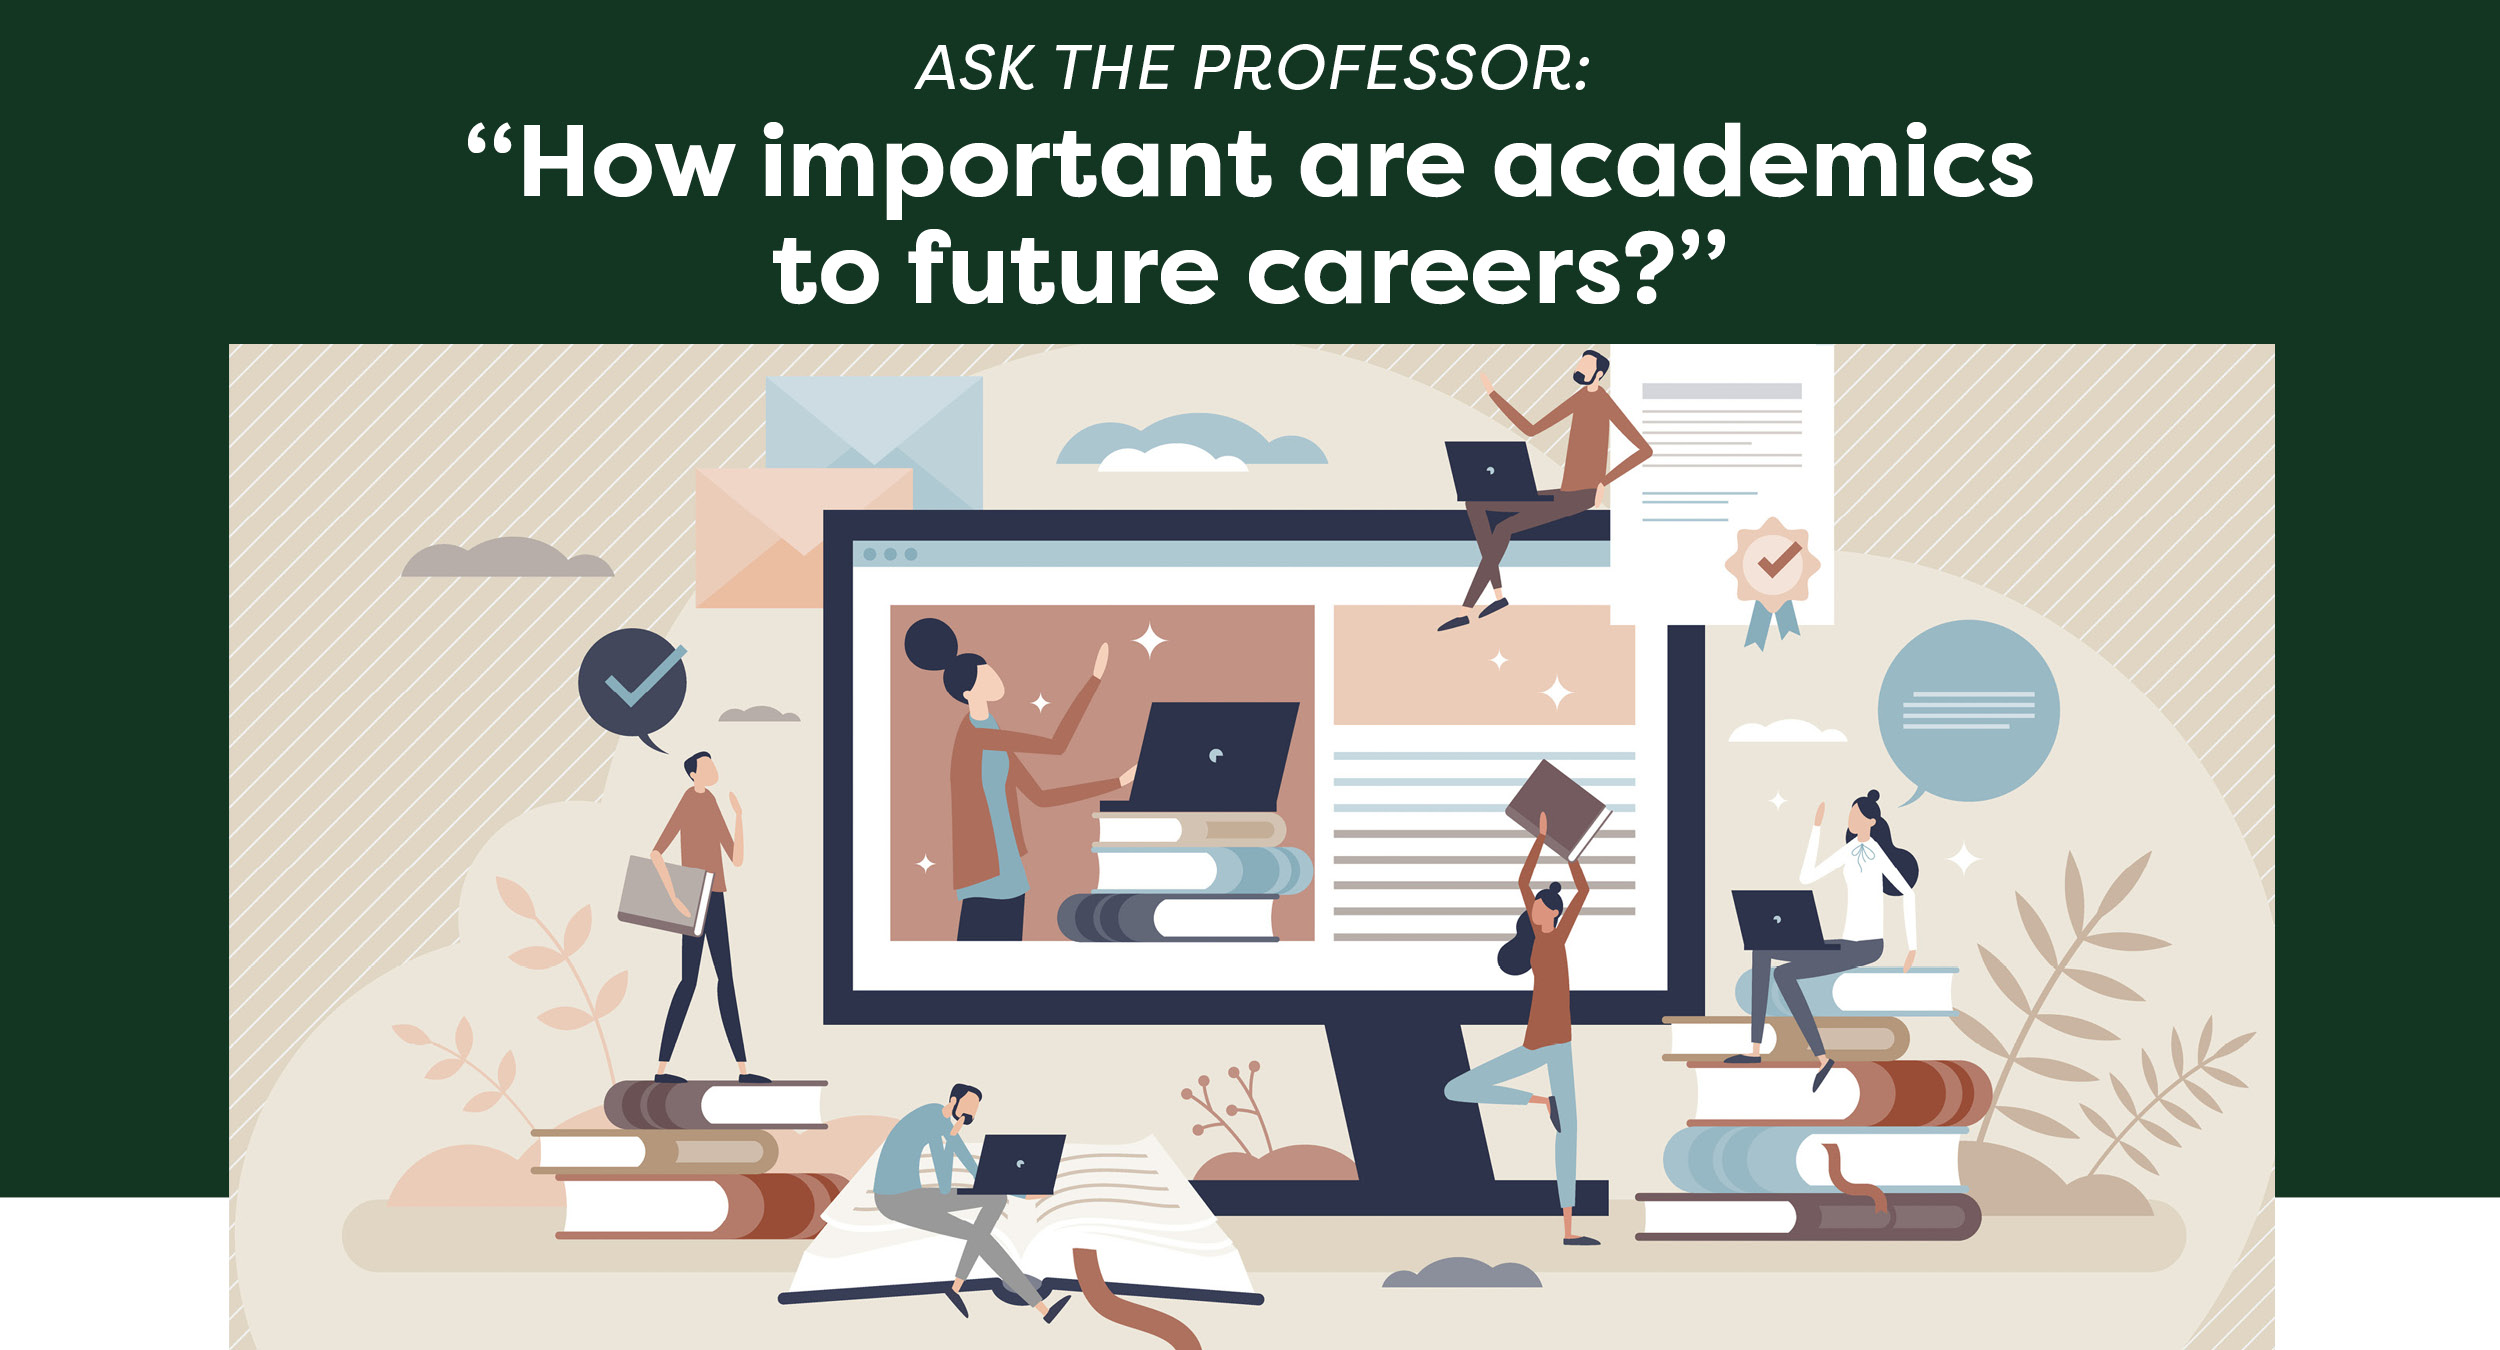 Ask the professor: “How important are academics to future careers?”